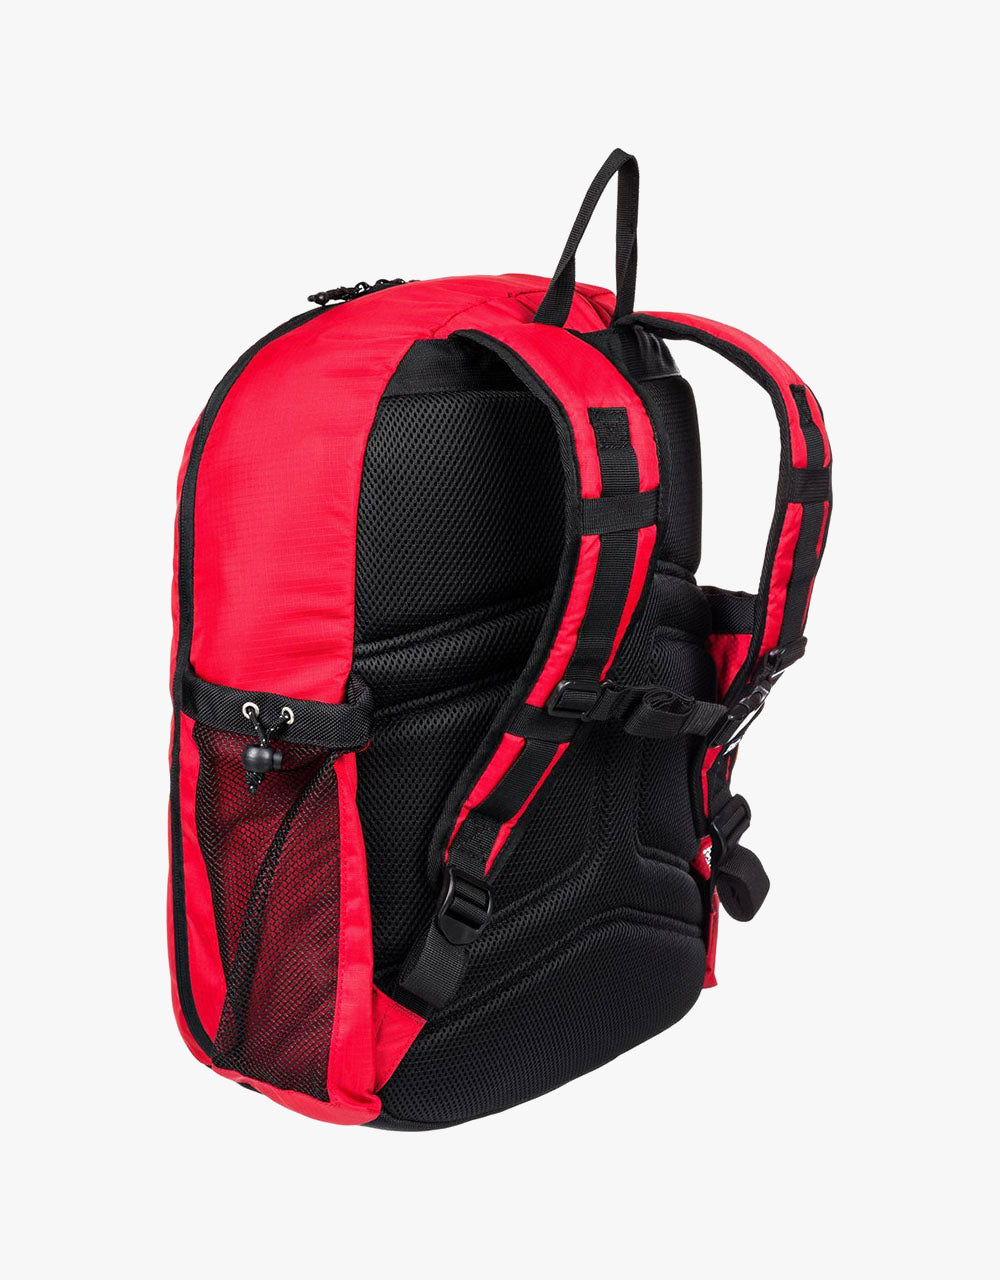 DC Bumper Backpack - Racing Red